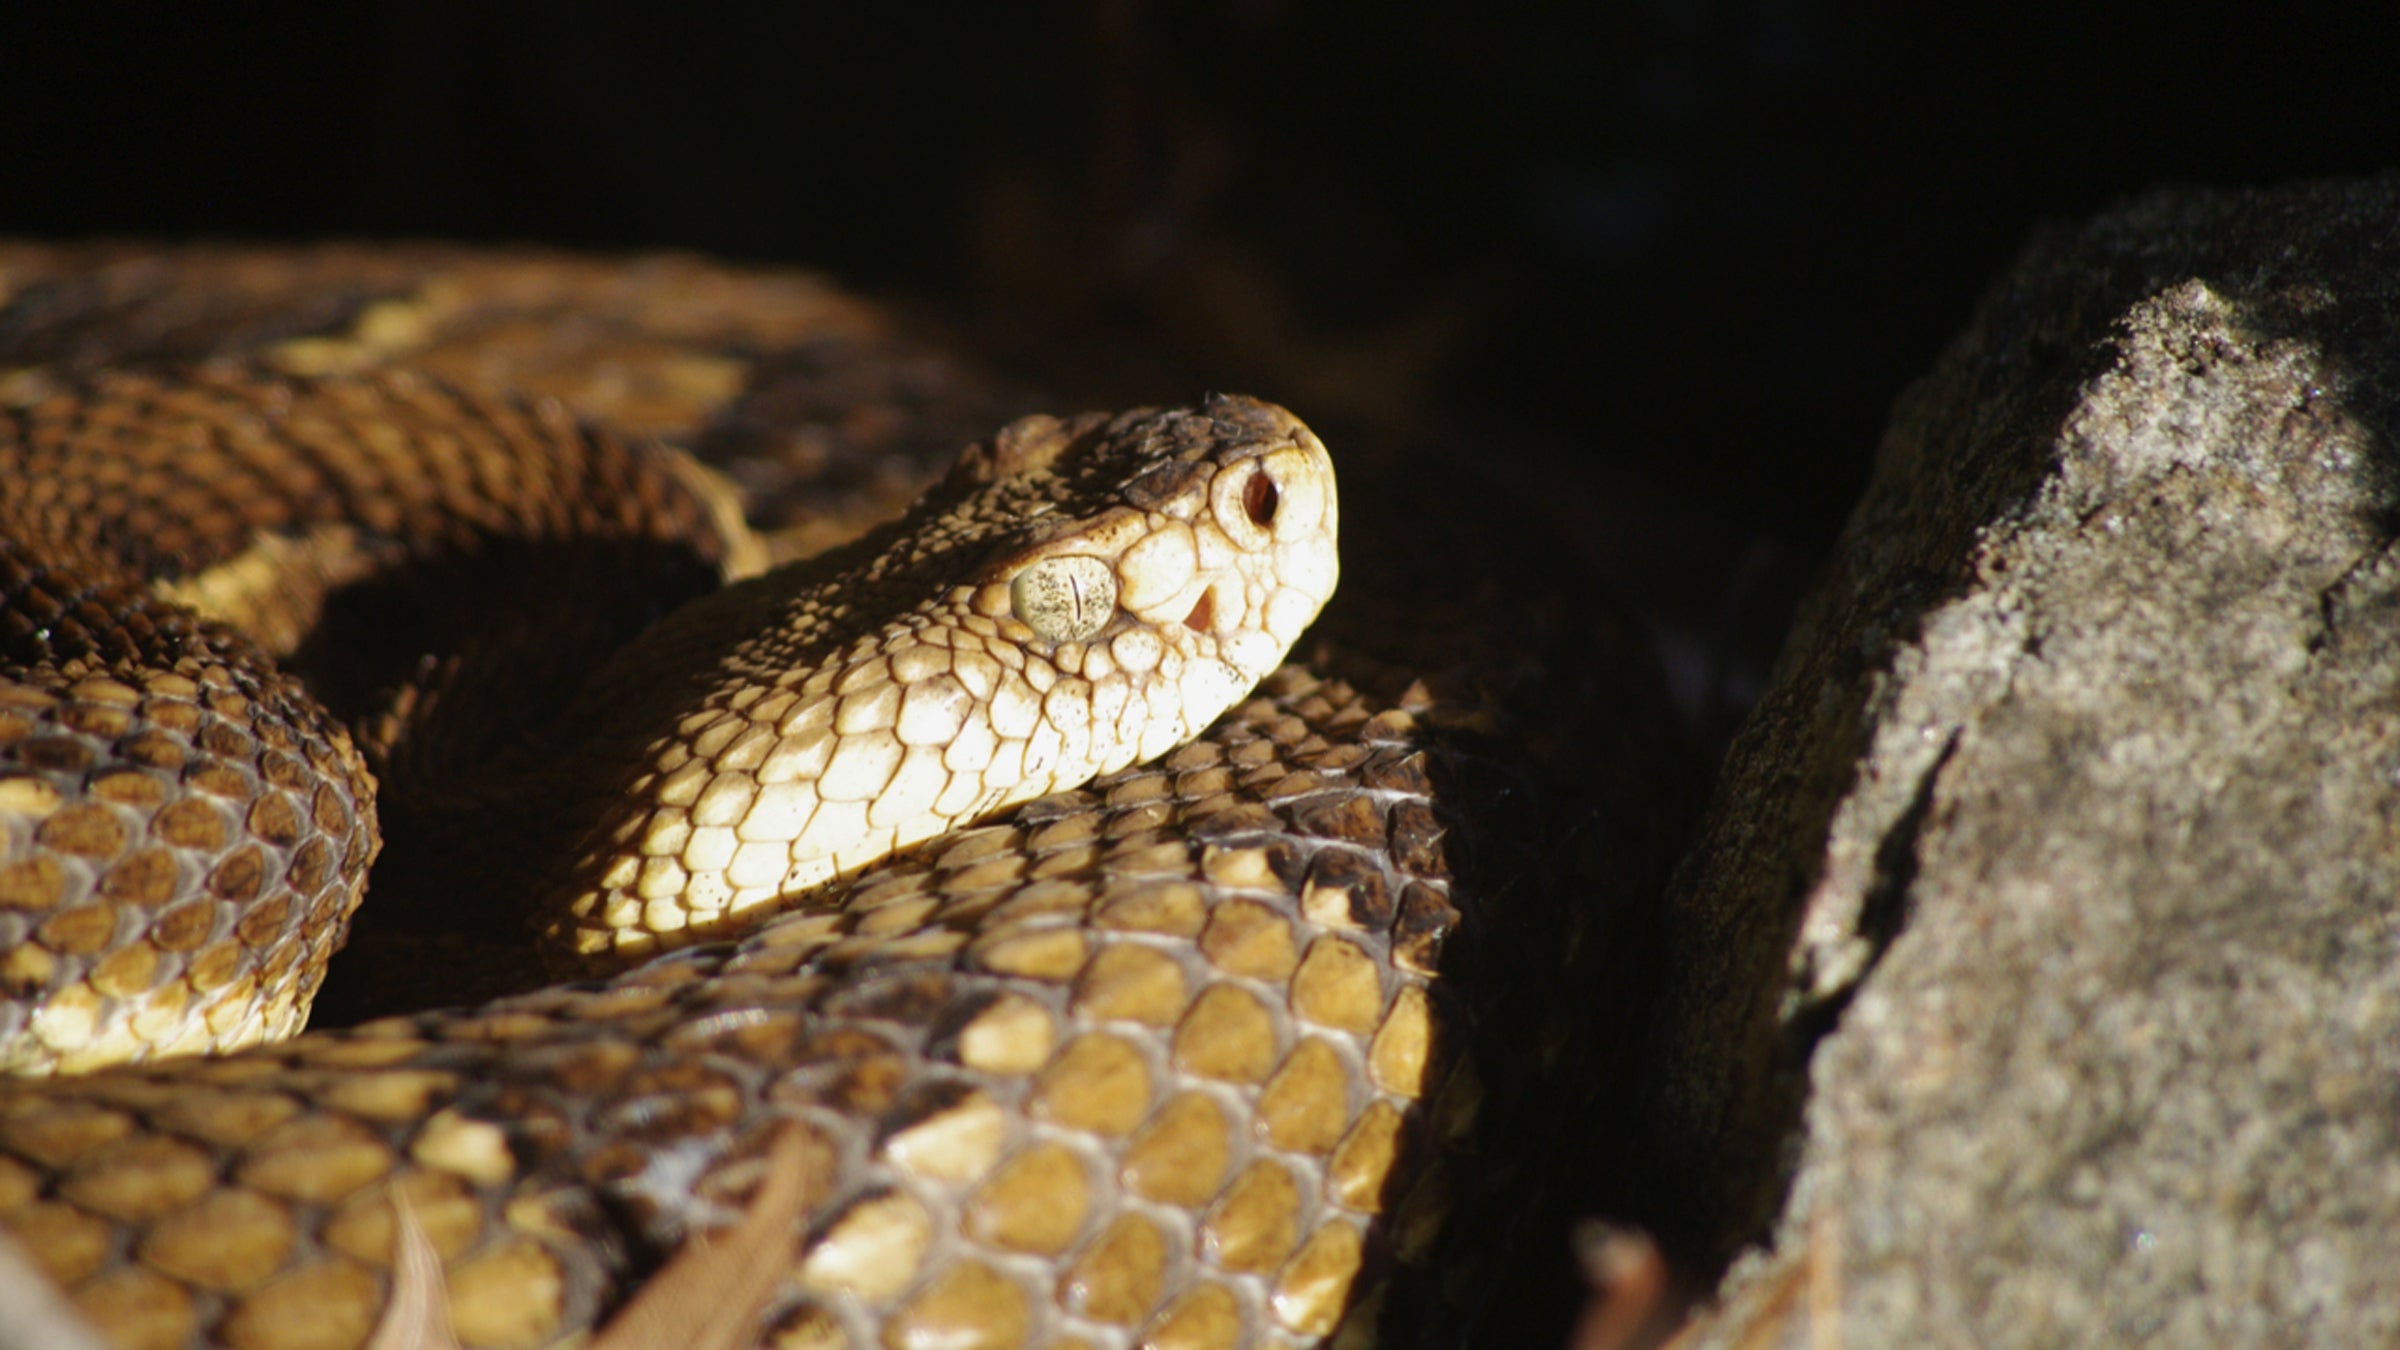 The Camper's Guide to Snake Safety - Campendium